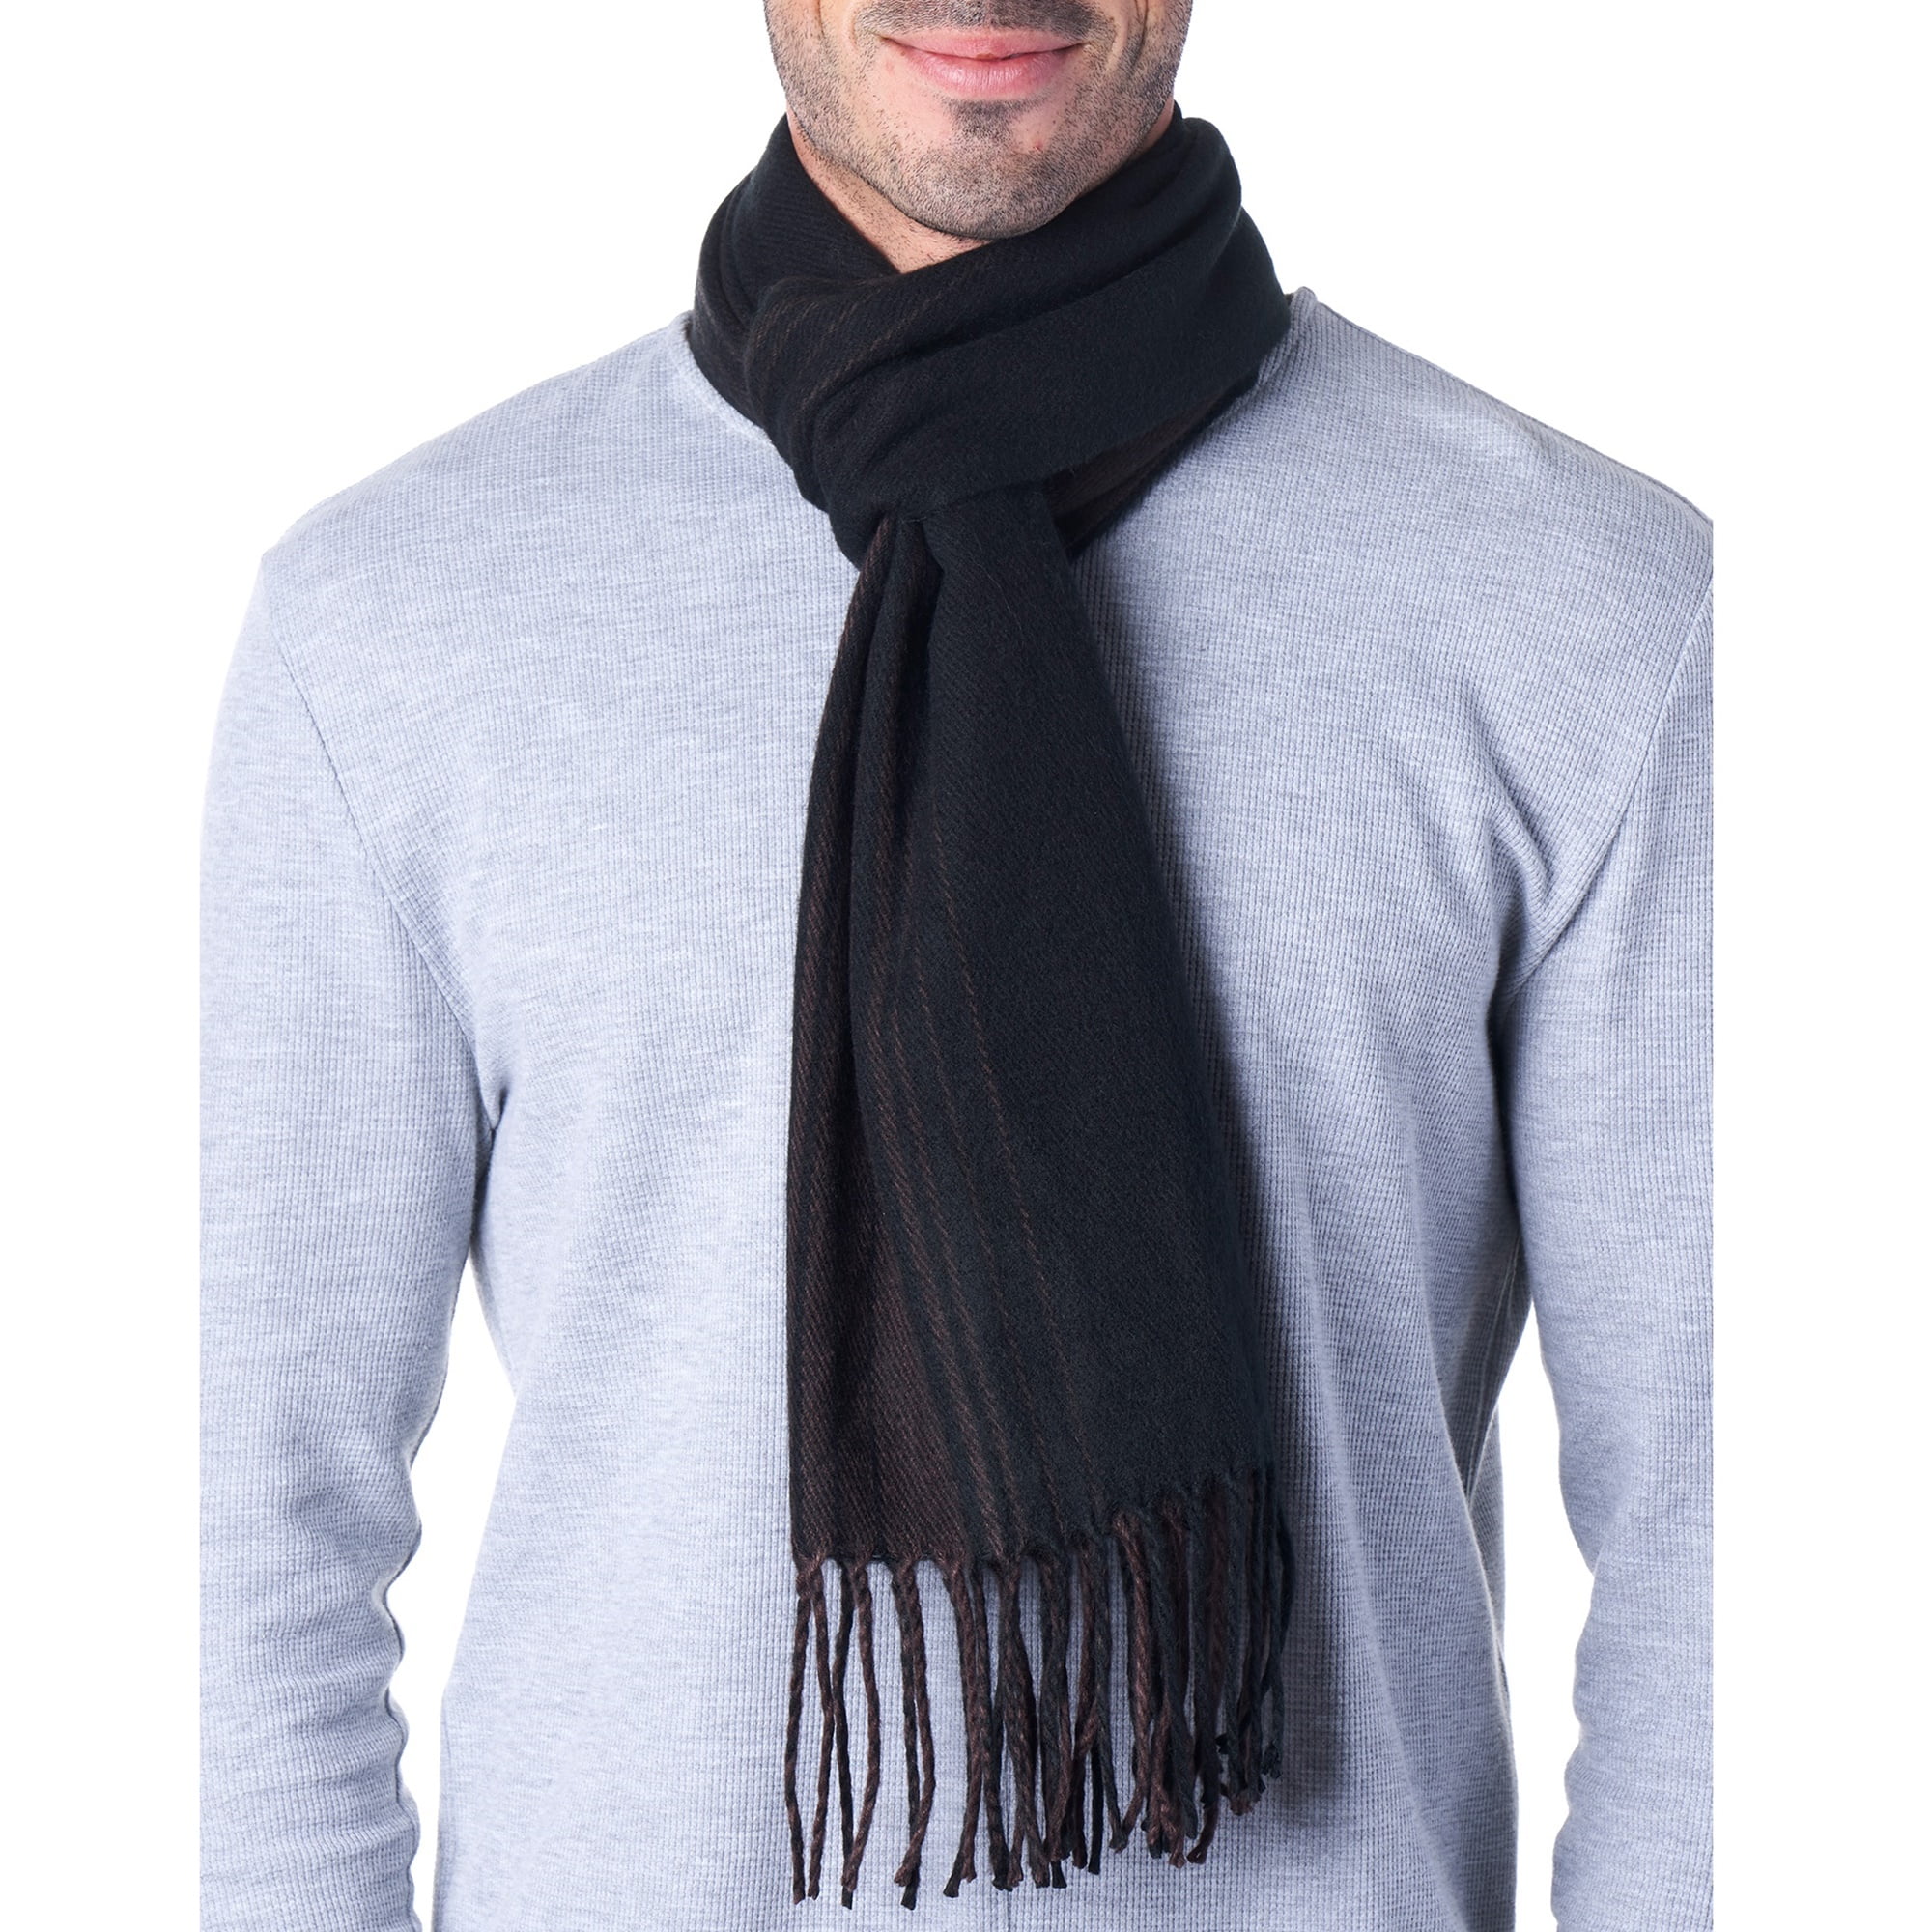 Men's Long Scarf Wrap Light-weight woven Stripe and solid w/ Fringe Blues Soft 